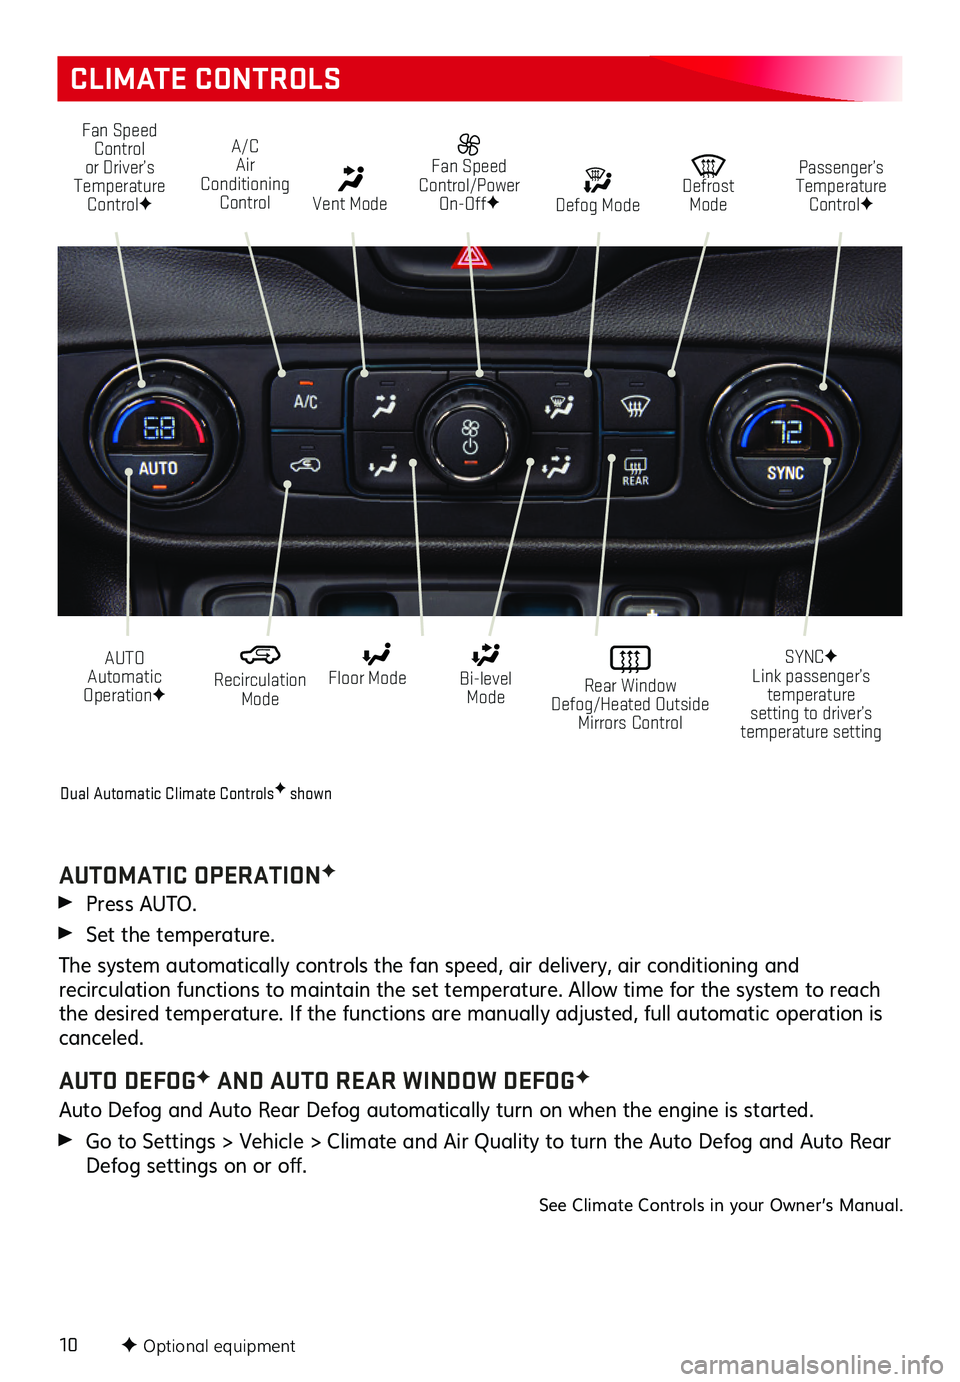 GMC TERRAIN 2019  Get To Know Guide 10
CLIMATE CONTROLS
F Optional equipment
Fan Speed Control or Driver’s Temperature ControlF
A/C Air Conditioning Control   Vent Mode
 Fan Speed Control/Power On-OffF
AUTO  Automatic OperationF
  Rec